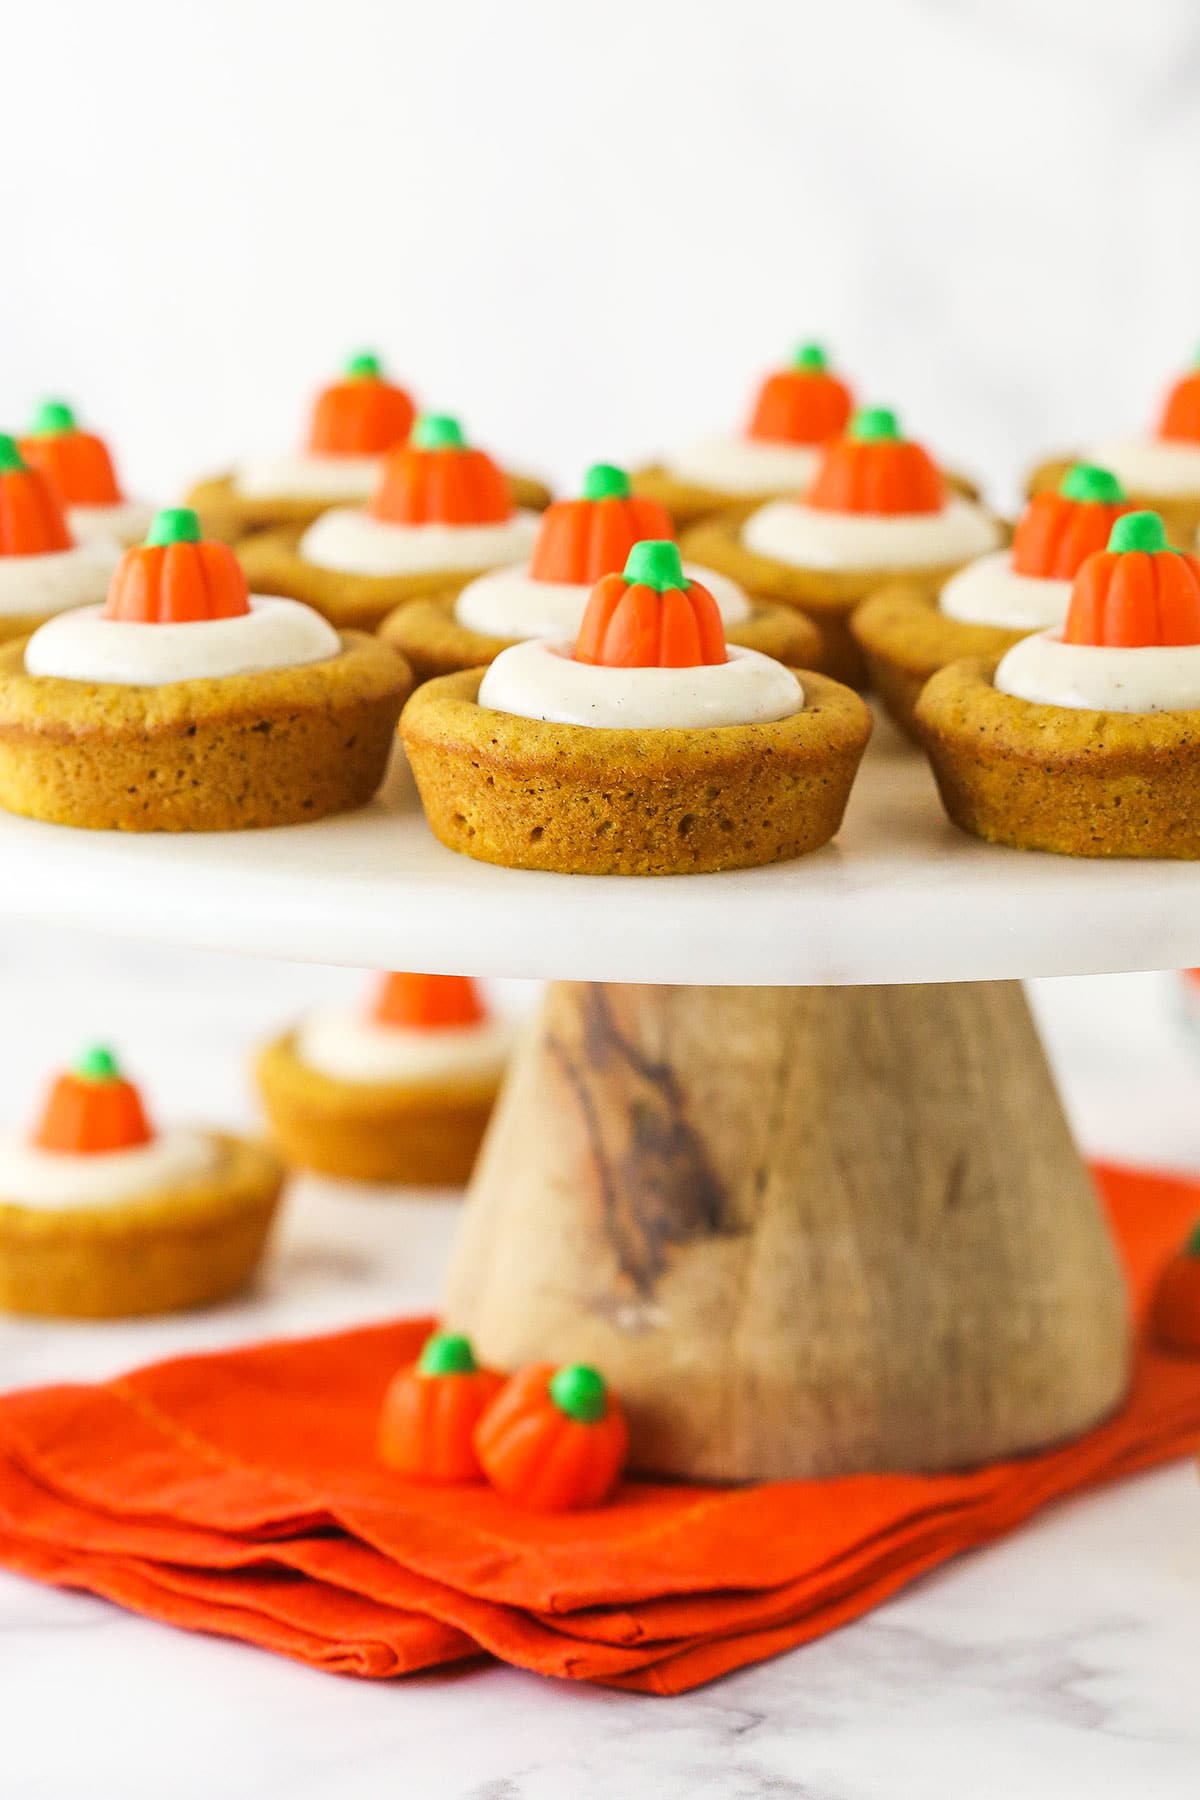 A large cake stand holding a batch of homemade pumpkin cookies with an orange cloth napkin underneath it